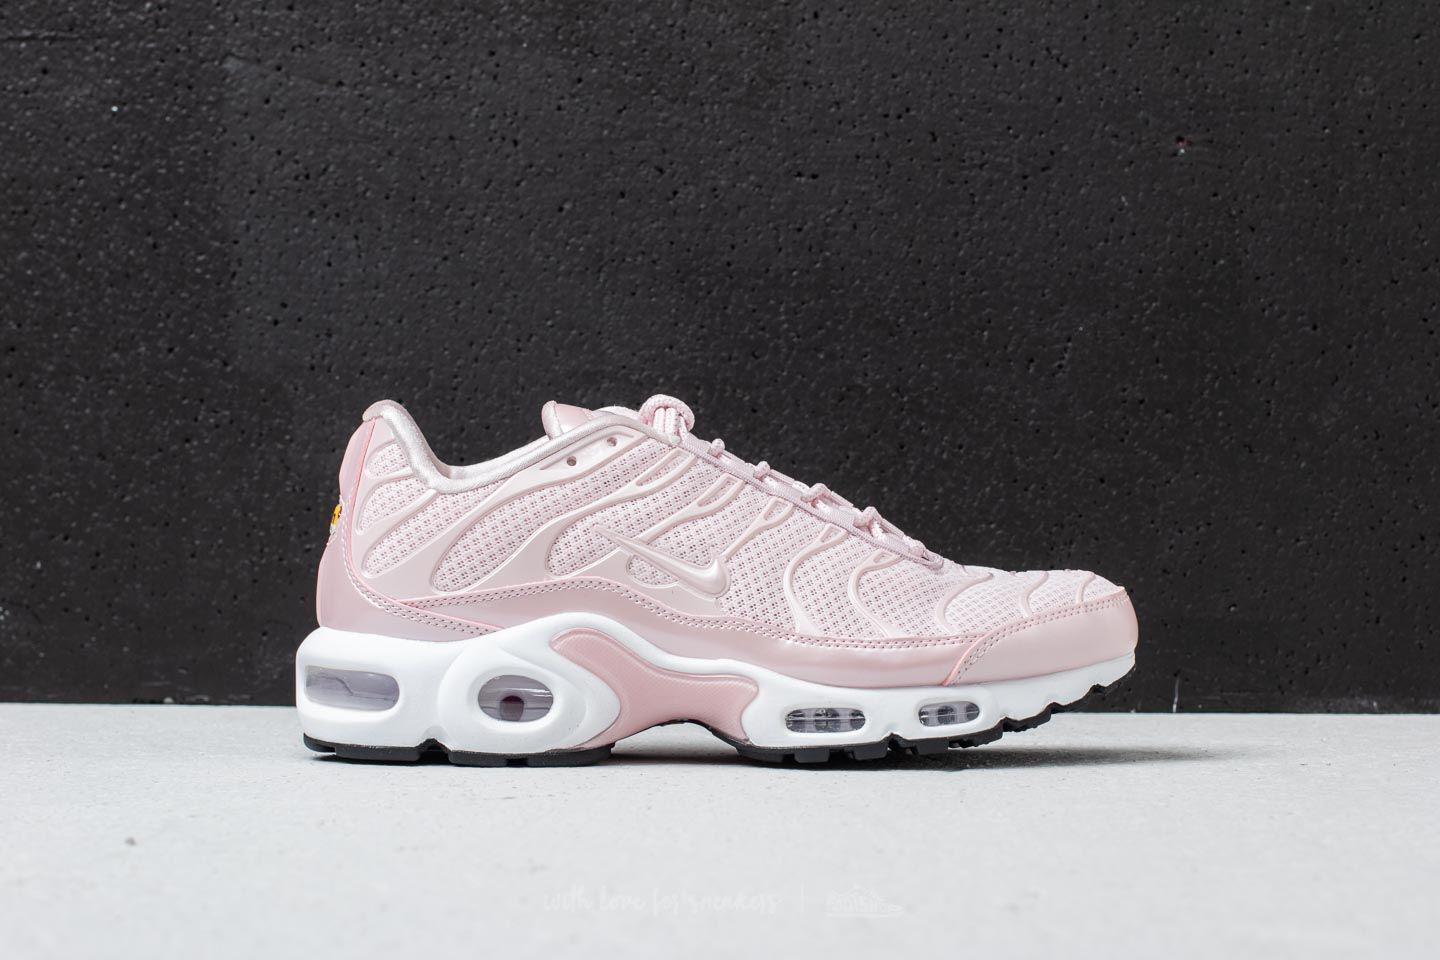 Nike Rubber Air Max Plus Premium Wmns Barely Rose/ Barely Rose ...